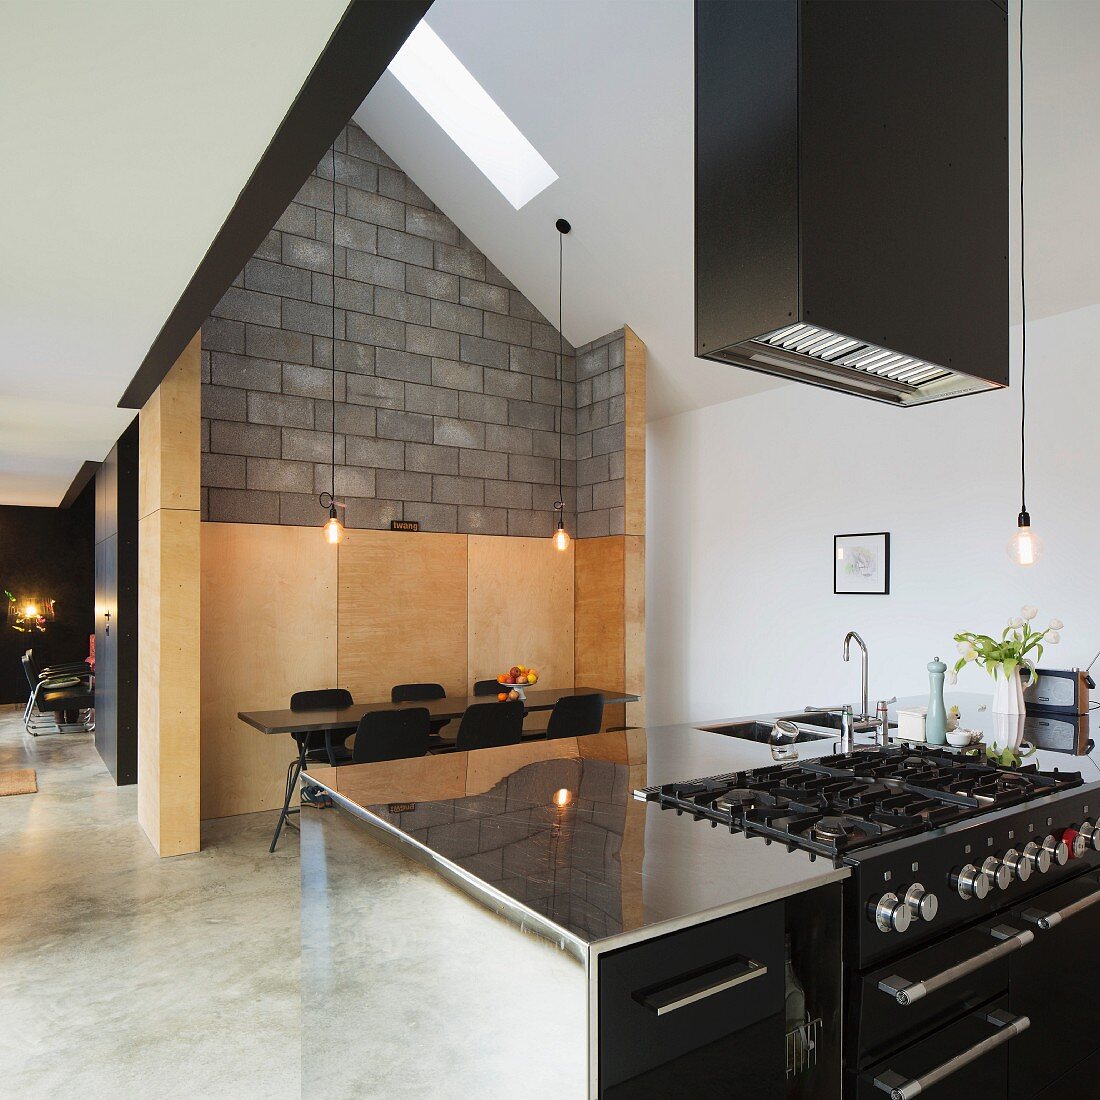 Stainless steel kitchen counter under extractor hood, dining area in wood-panelled niche and concrete block wall in modern, open-plan interior